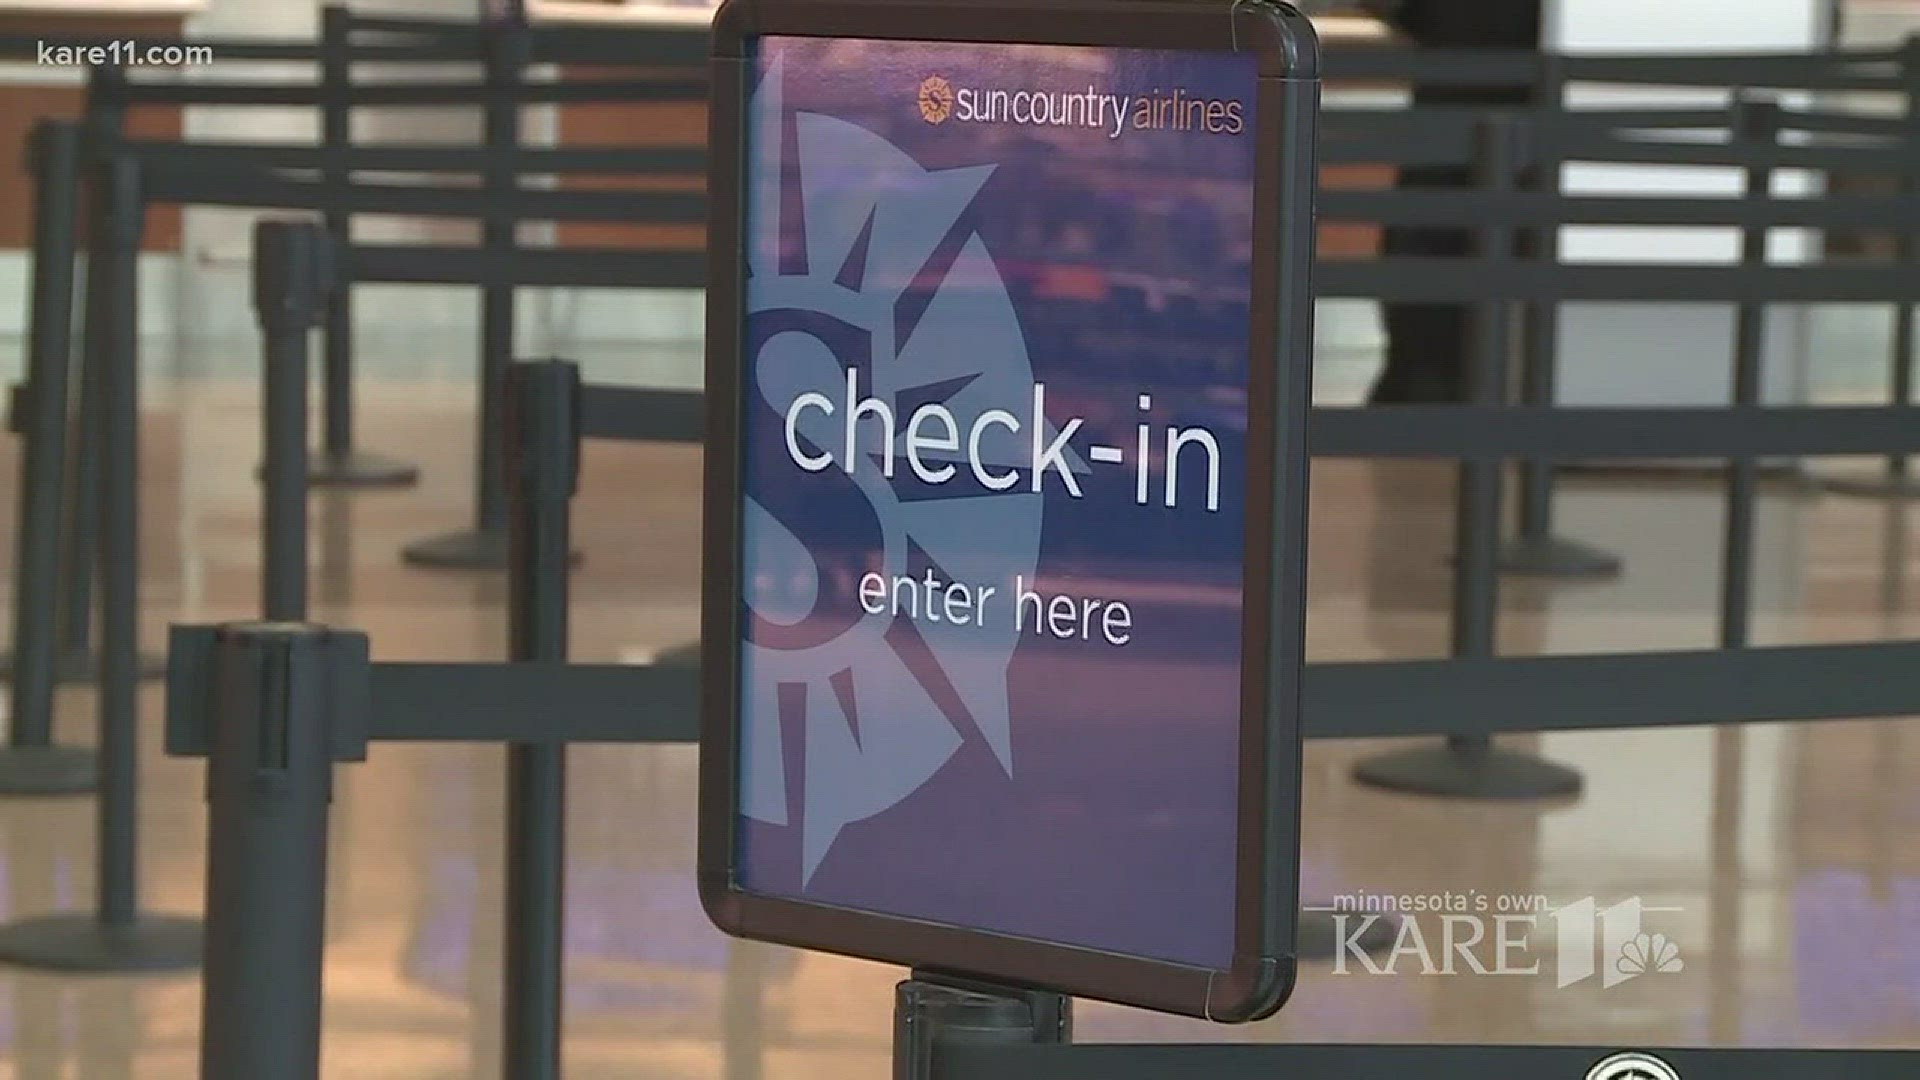 Zach Lashway reports on the new fees Sun Country is charging for baggage. http://kare11.tv/2zJ3jCO